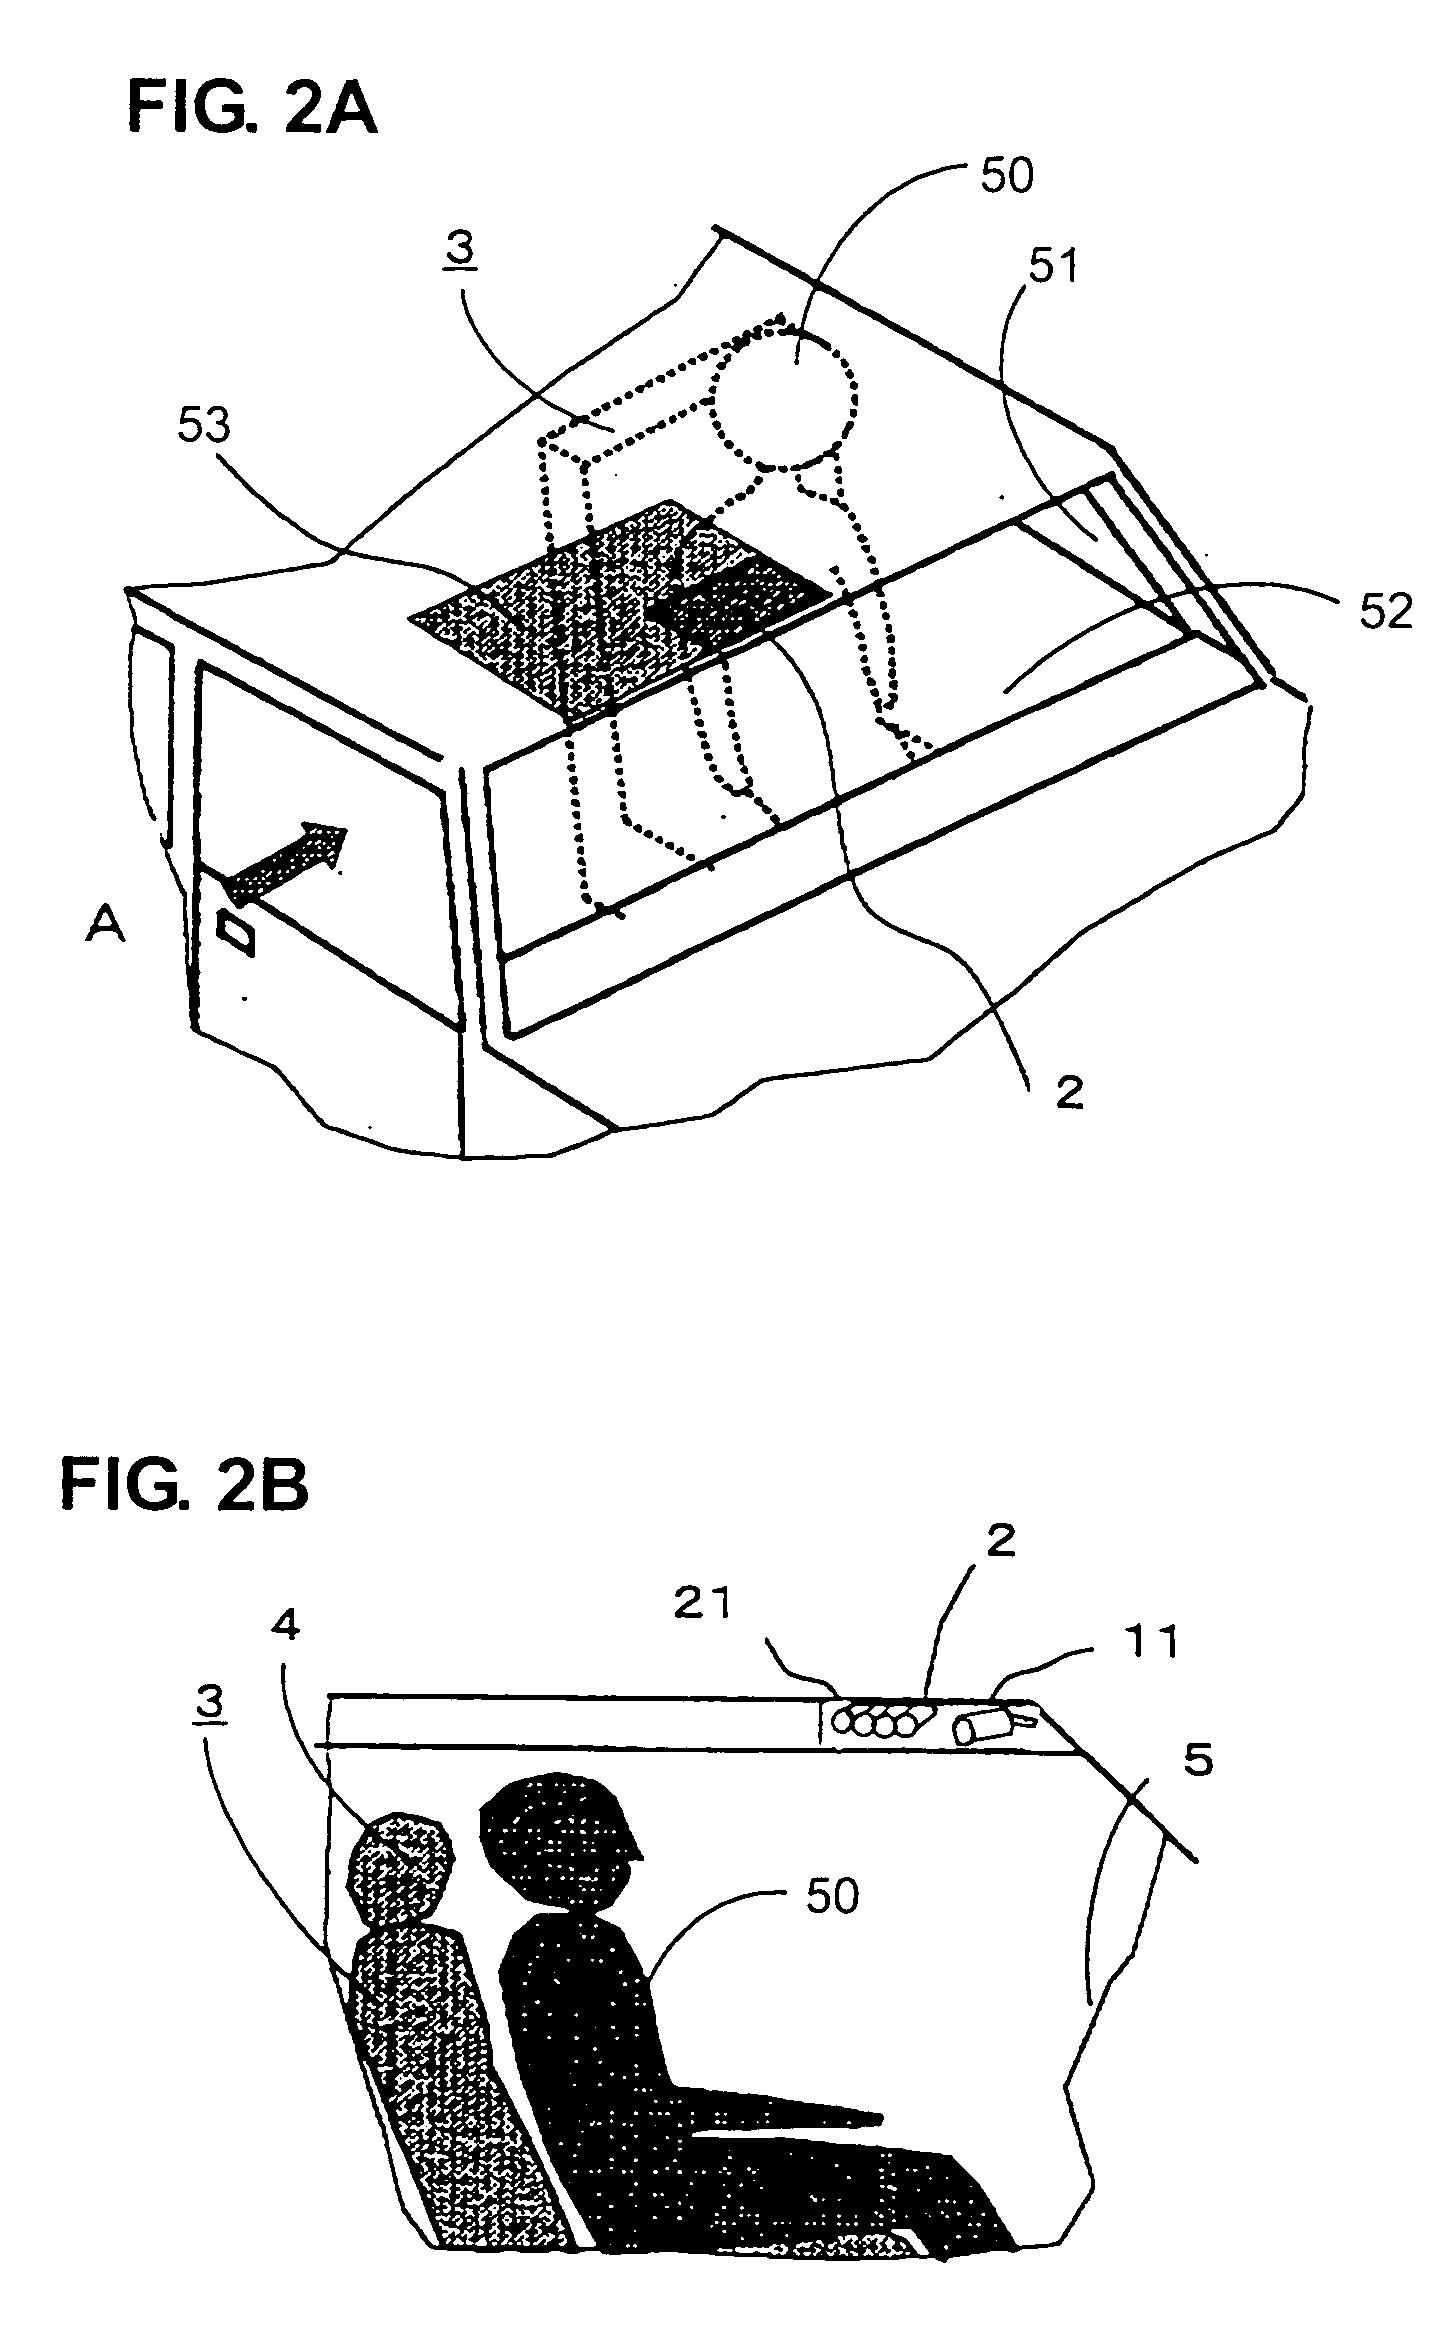 Vehicle occupant detection apparatus for deriving information concerning condition of occupant of vehicle seat